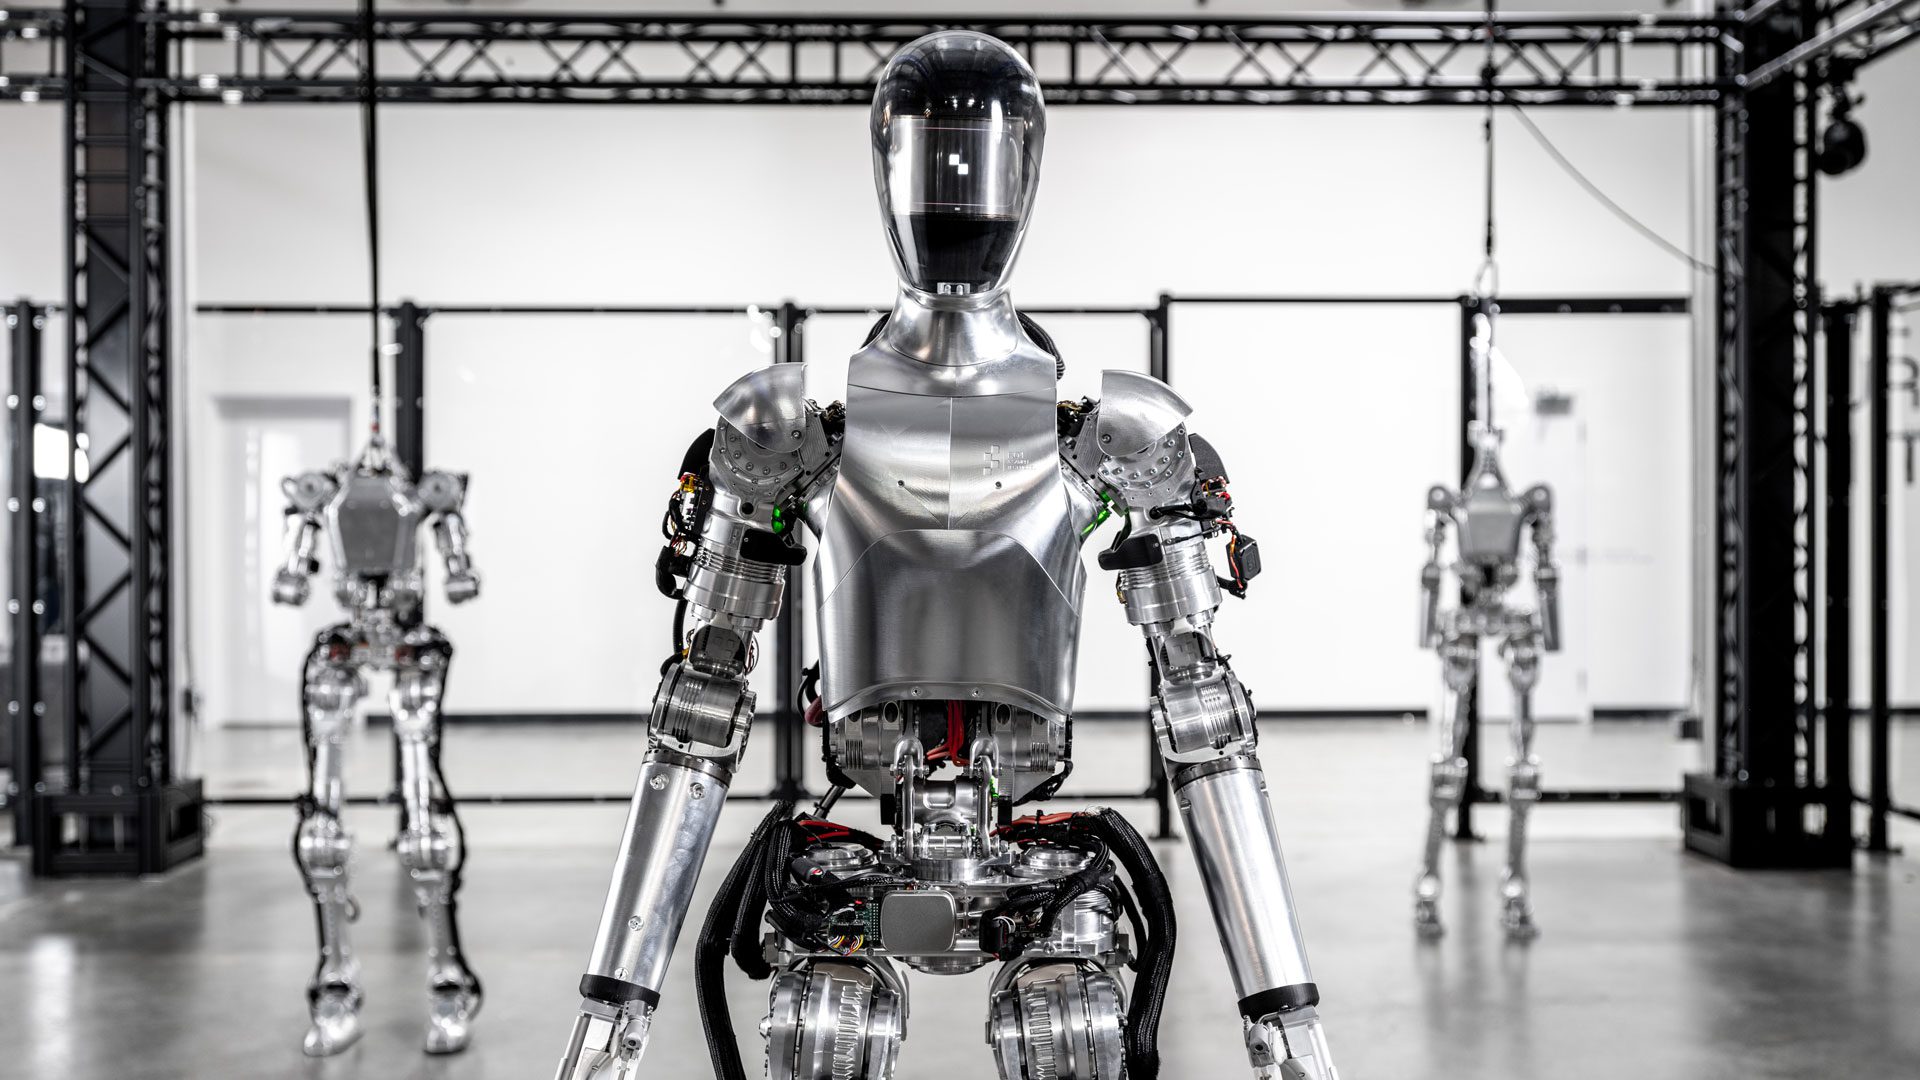 ‘We face high risk and extremely low chances of success’ notes humanoid robot company Figure AI that just got millions from Bezos, OpenAI, and Nvidia